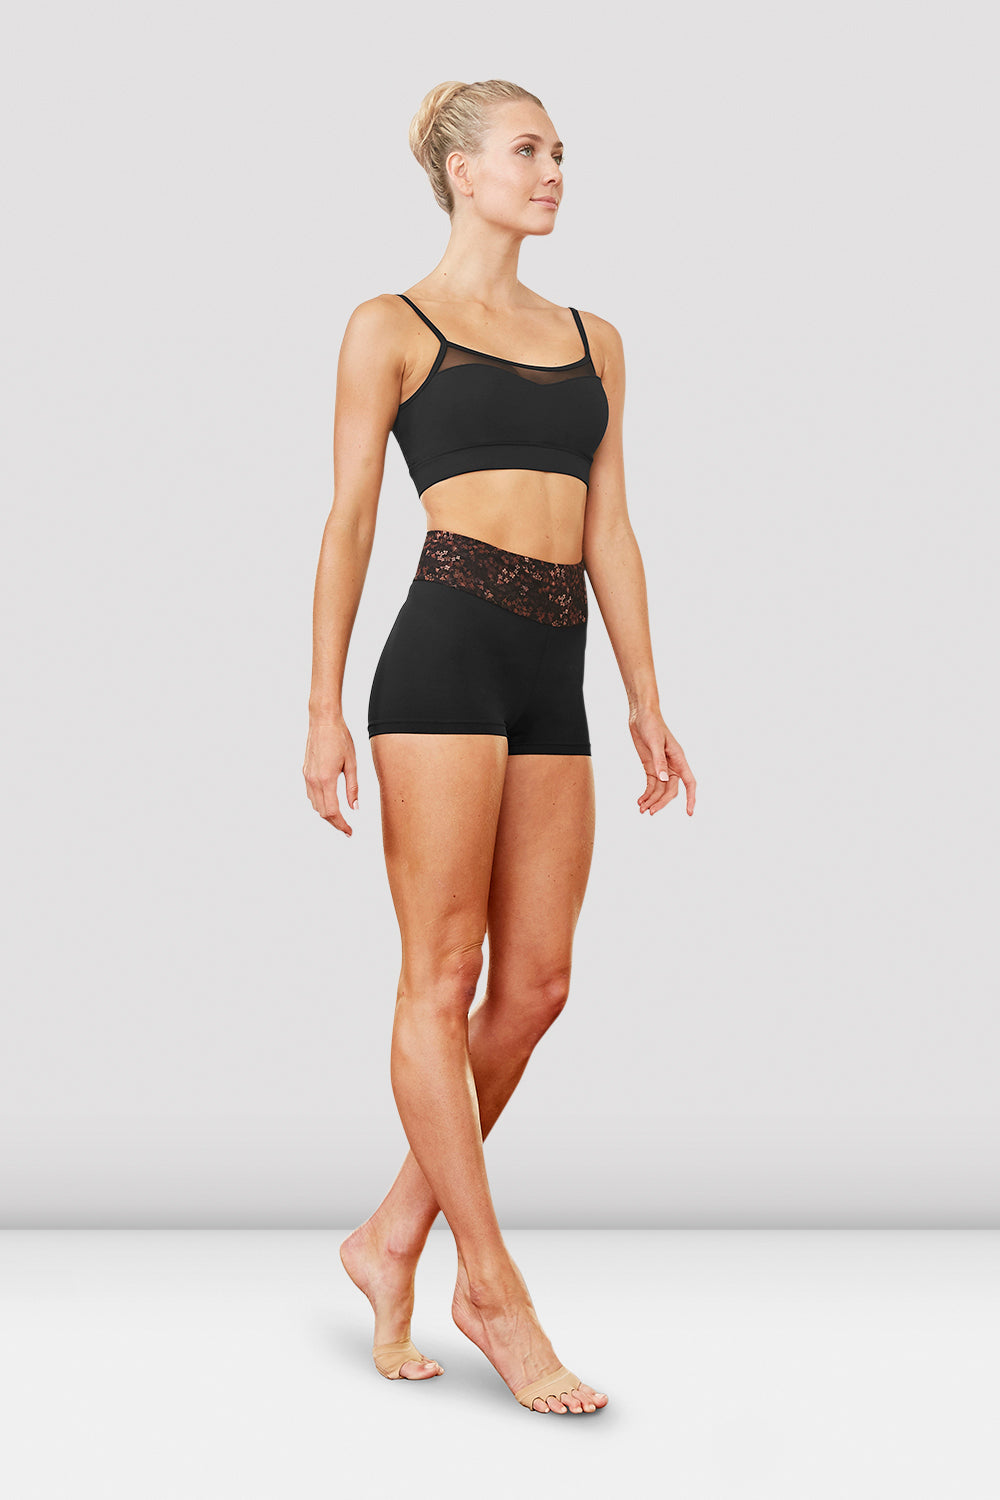 A female dancer wearing the Ladies Armelle high waist briefs and Ladies Becca camisole crop top